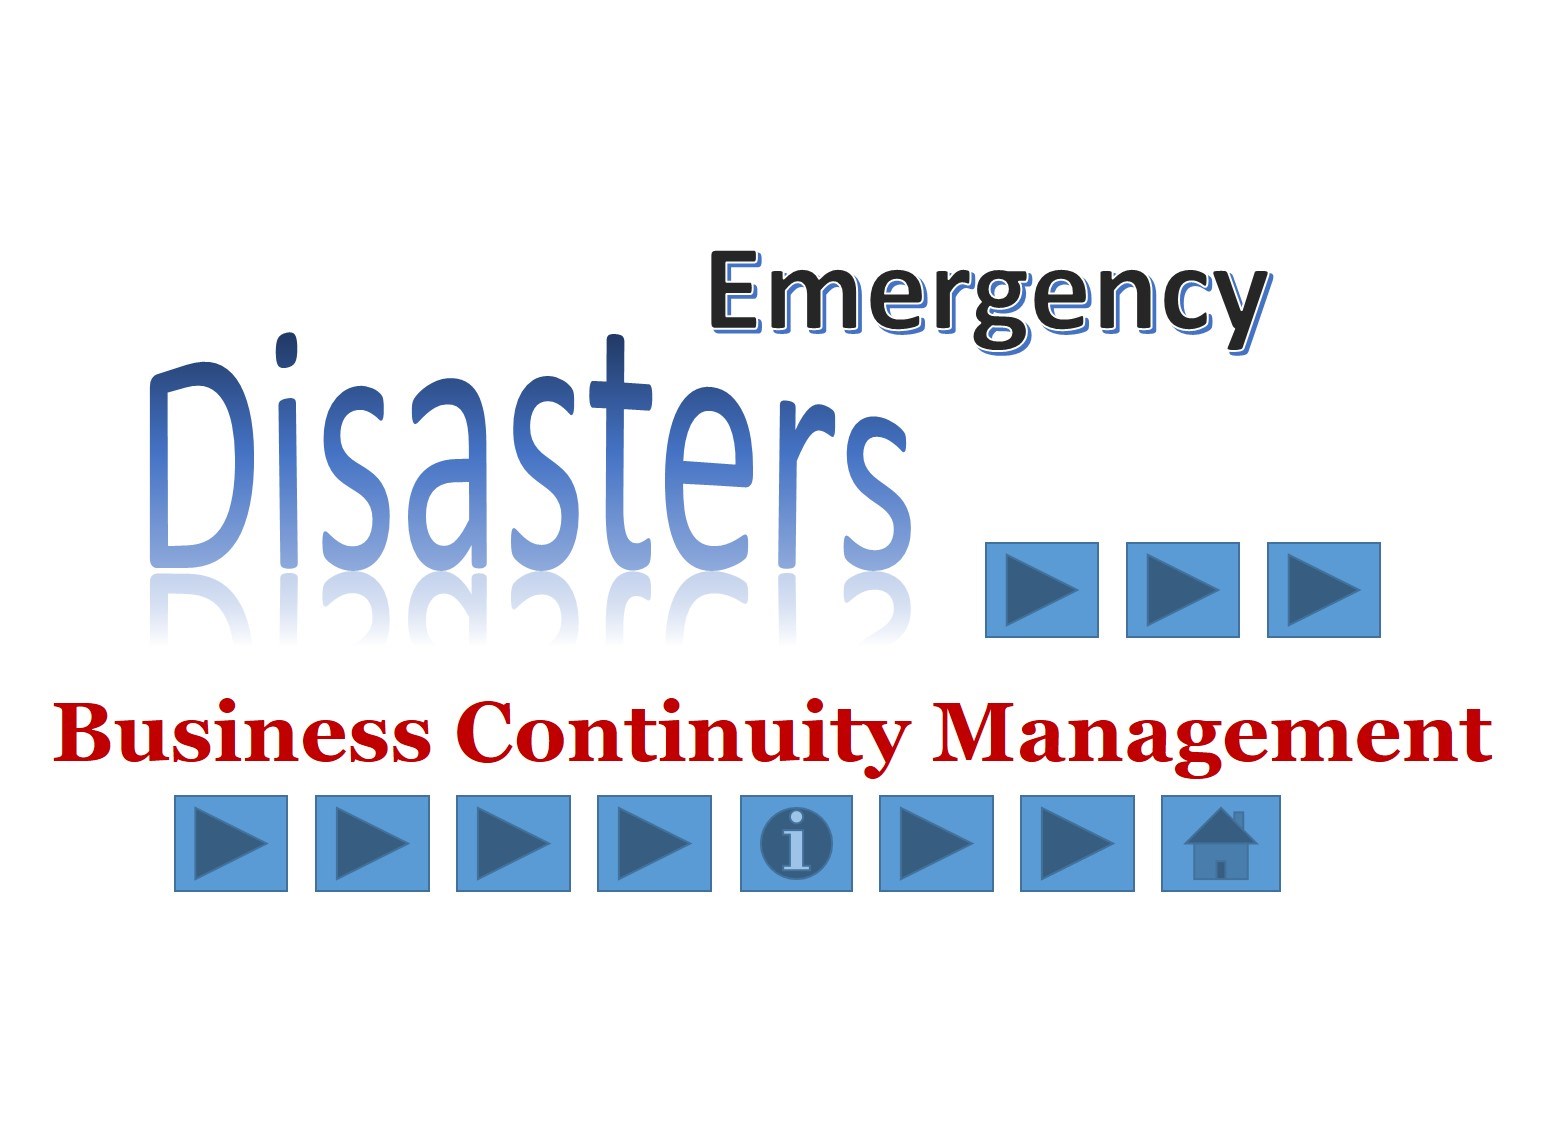 Business Continuity Management - Featured Image